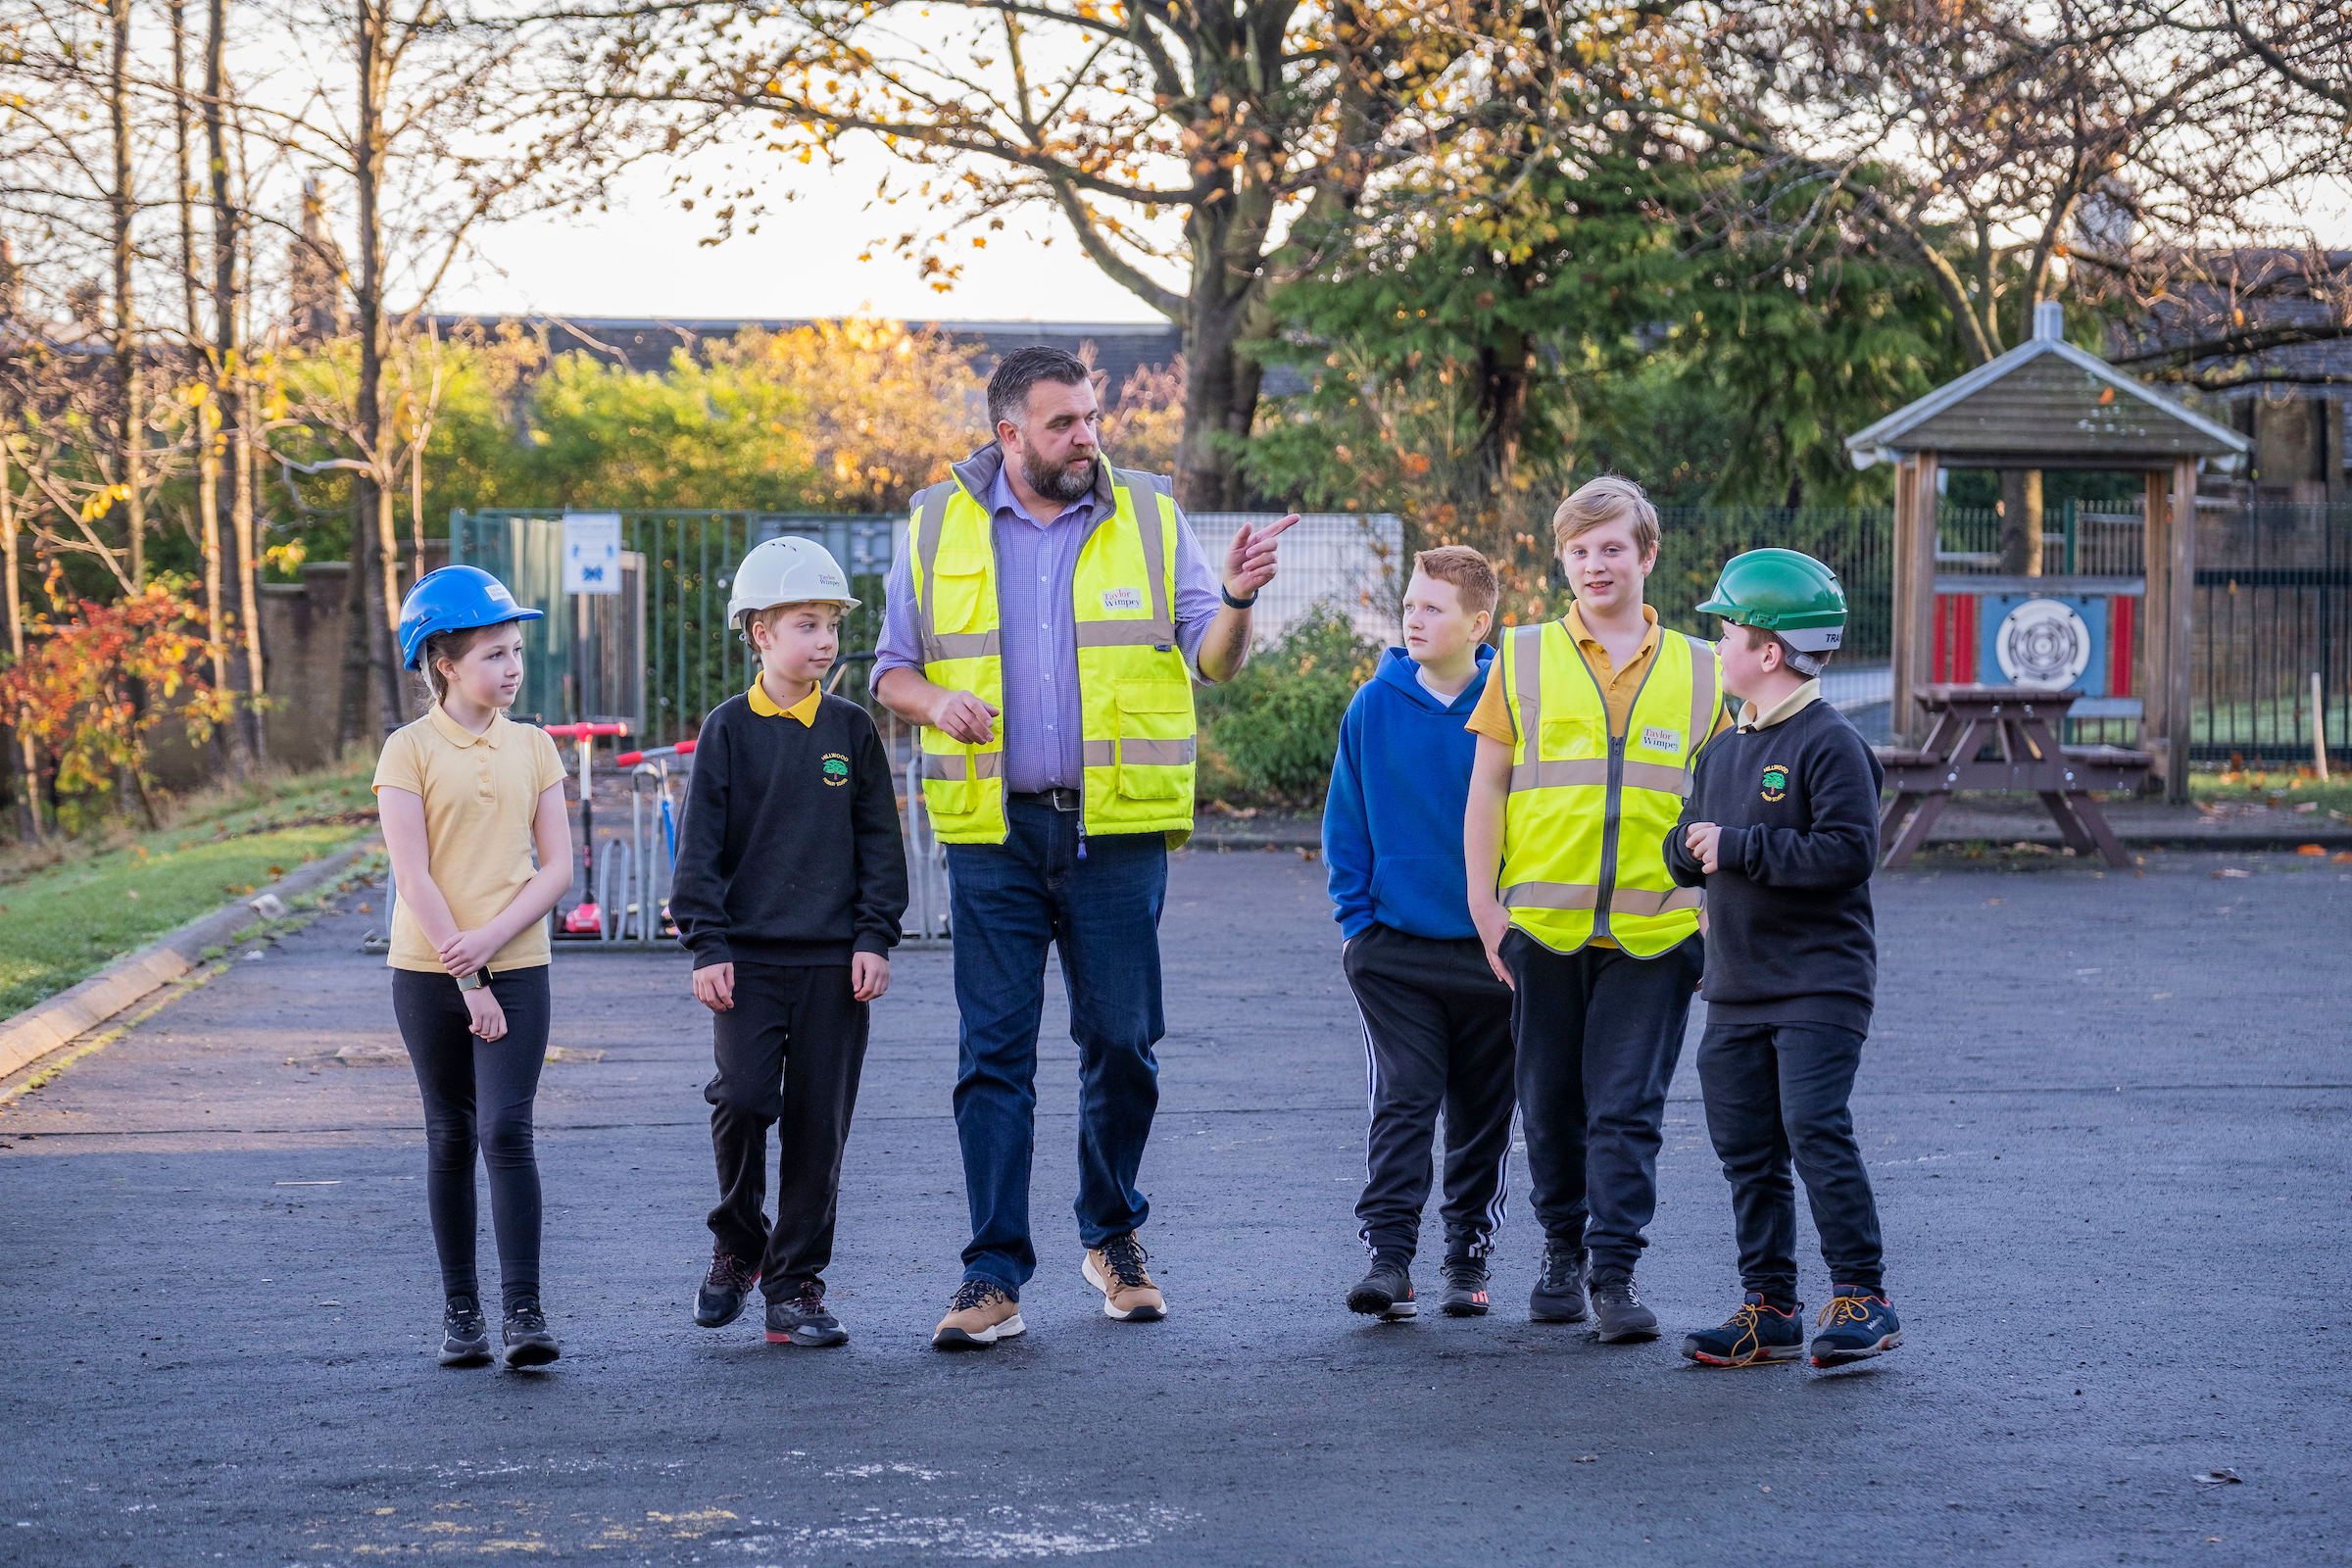 Taylor Wimpey gives safety lessons to pupils in Haddington and Ratho Station